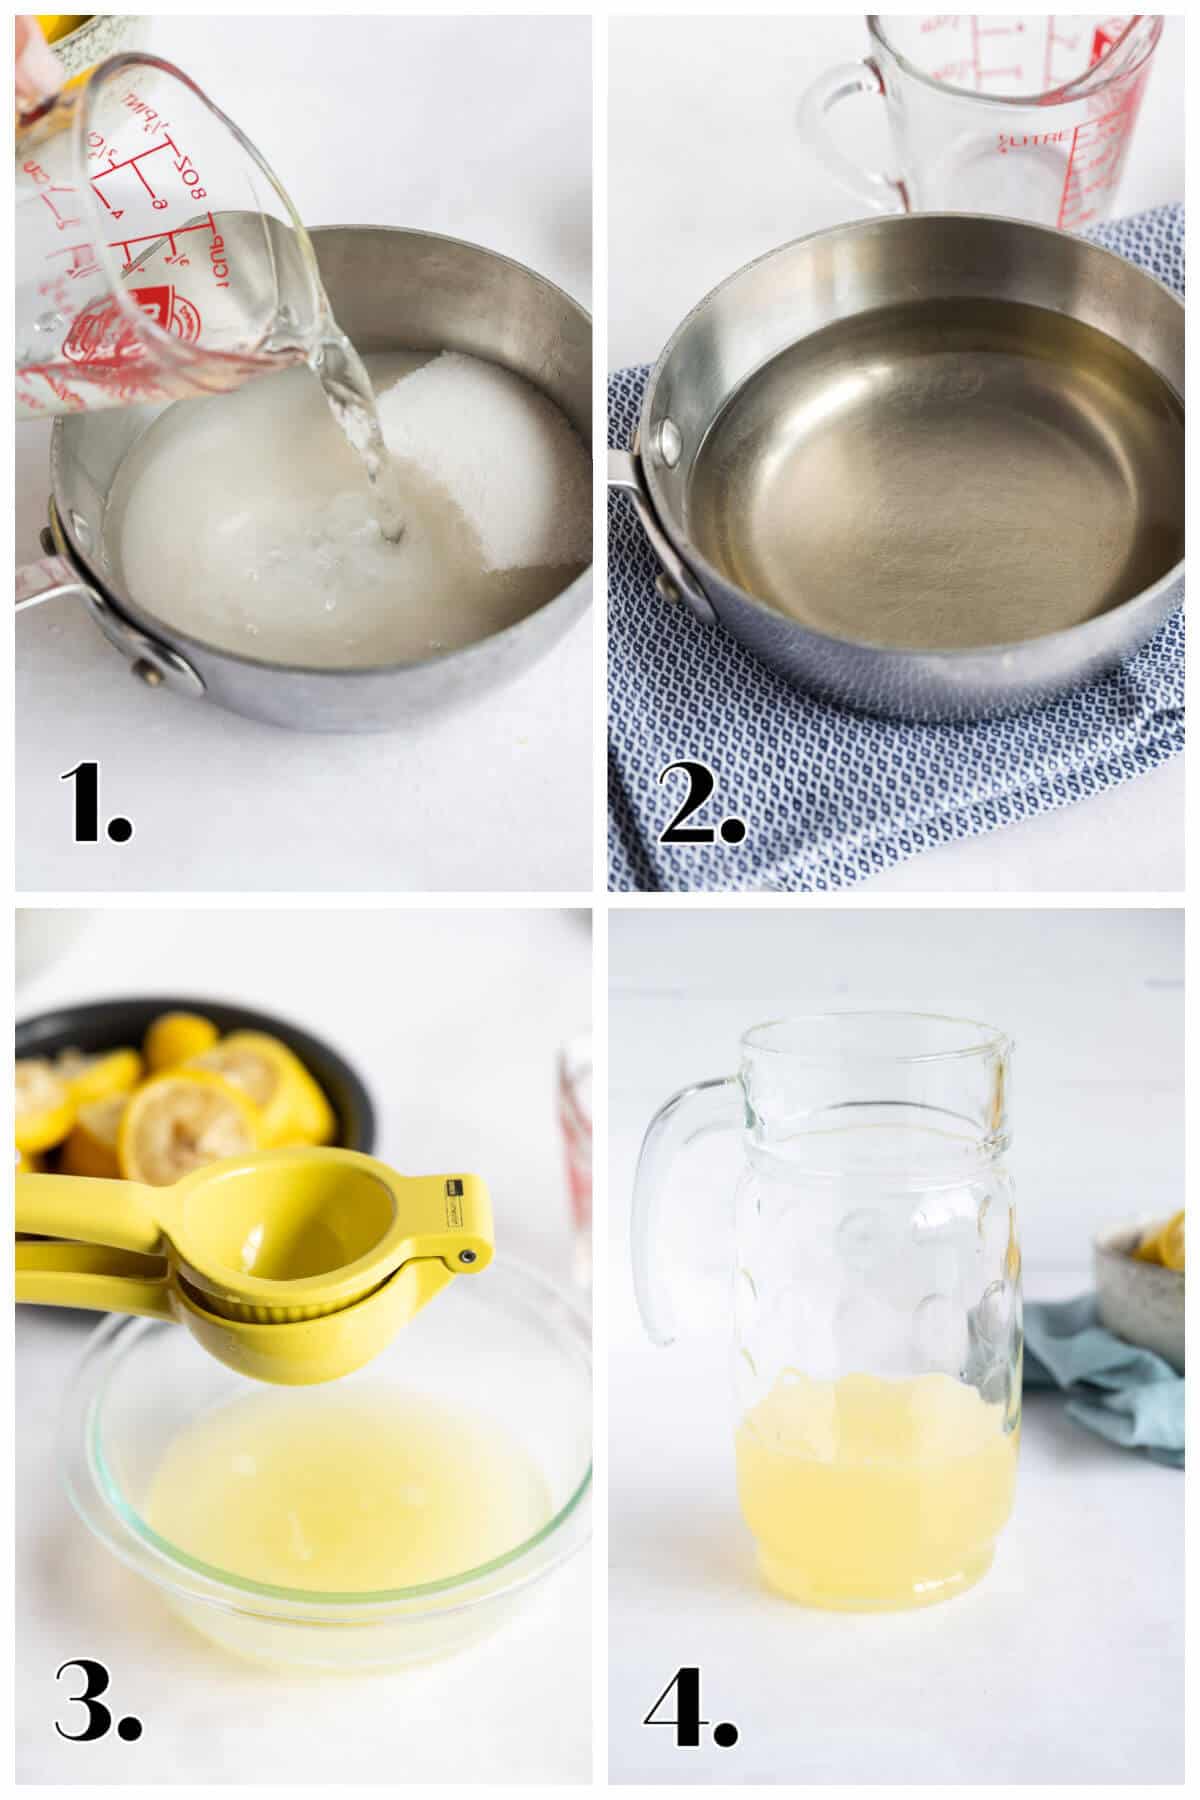 4 image collage showing the steps to make homemade low carb lemonade